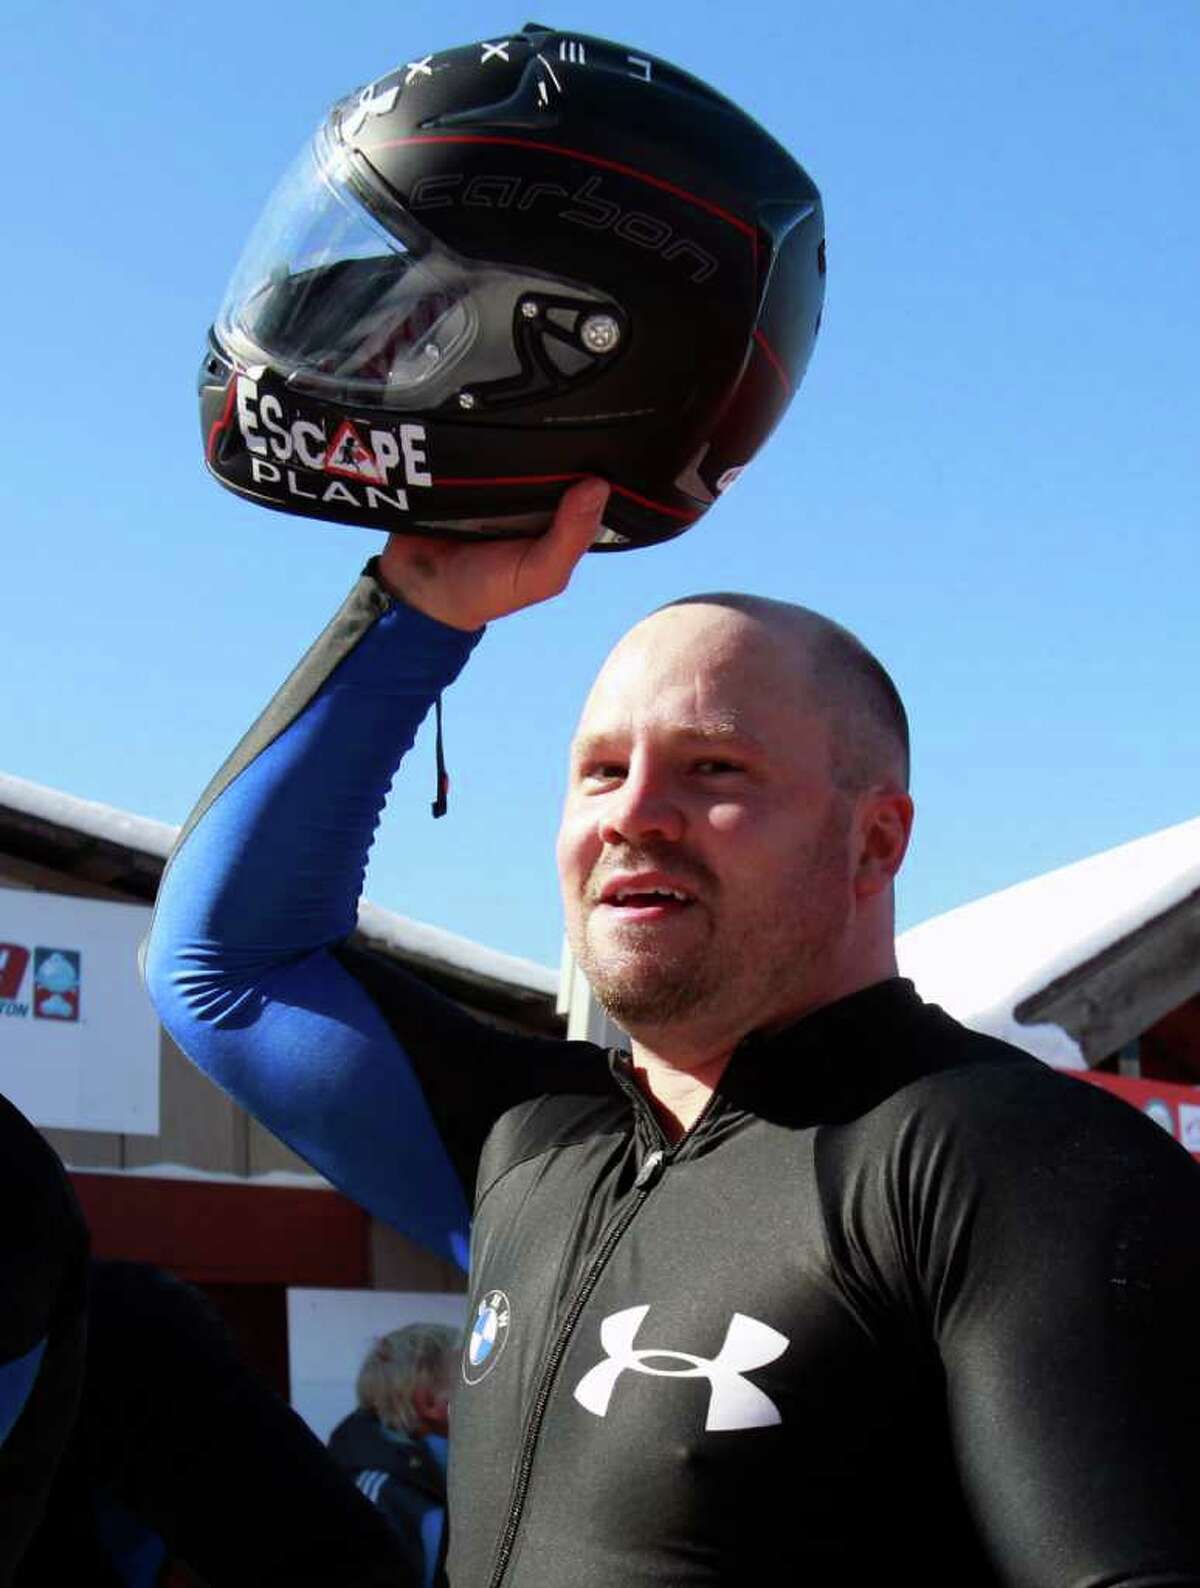 United States pilot Steven Holcomb reacts after his team won the men's four-man bobsled world championships in Lake Placid, N.Y., Sunday, Feb. 26, 2012. (AP Photo/Mike Groll)